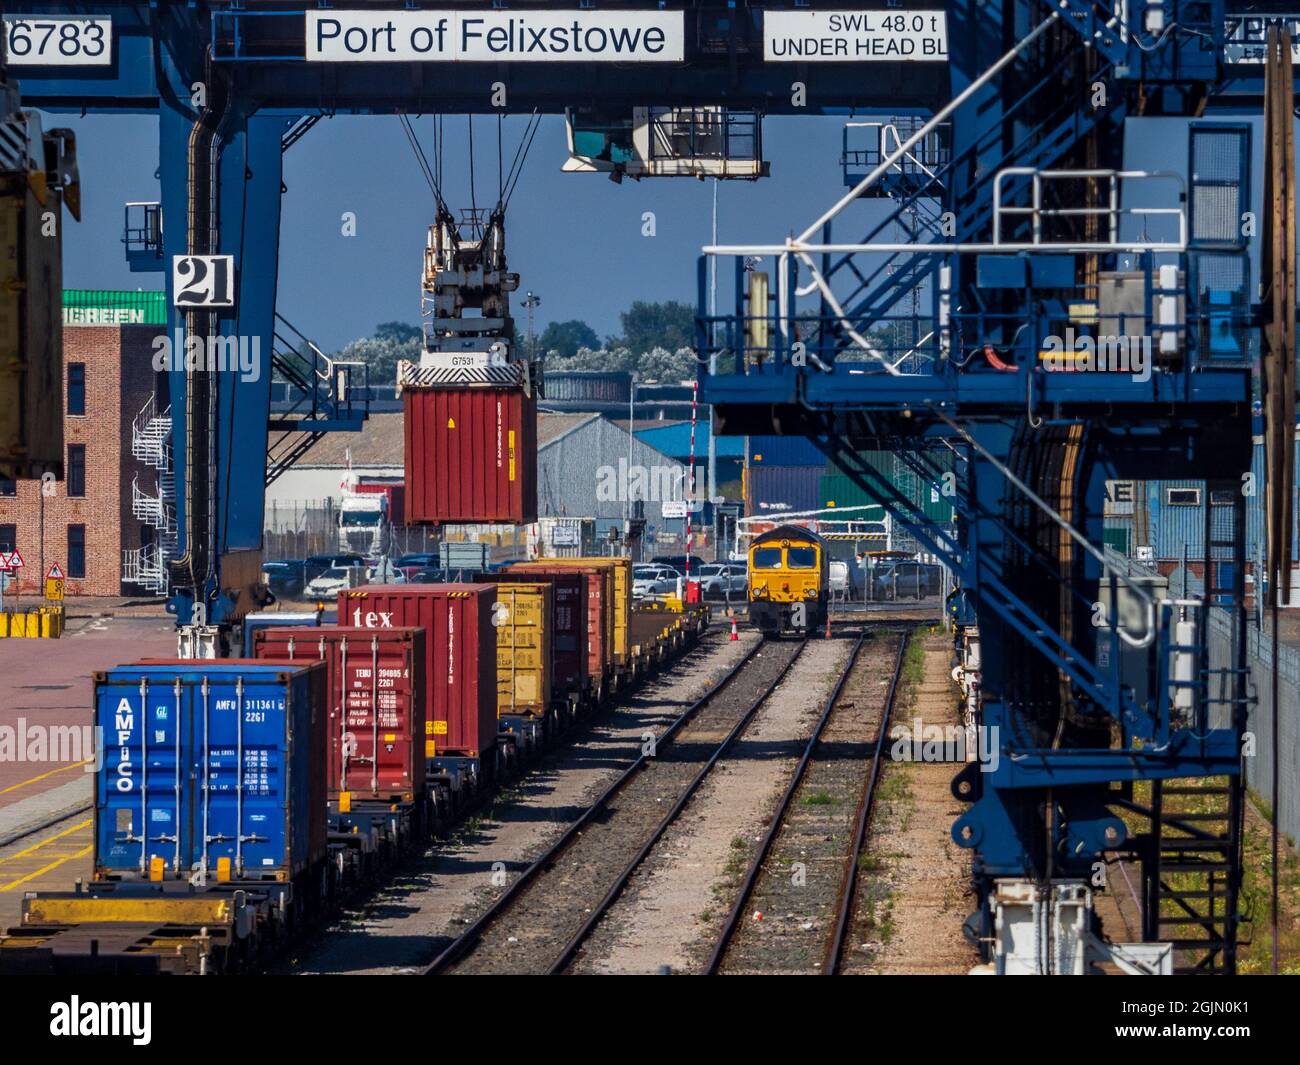 Rail Freight UK - Intermodal Containers being loaded onto freight trains in Felixstowe Port, the UK's largest container port. Stock Photo